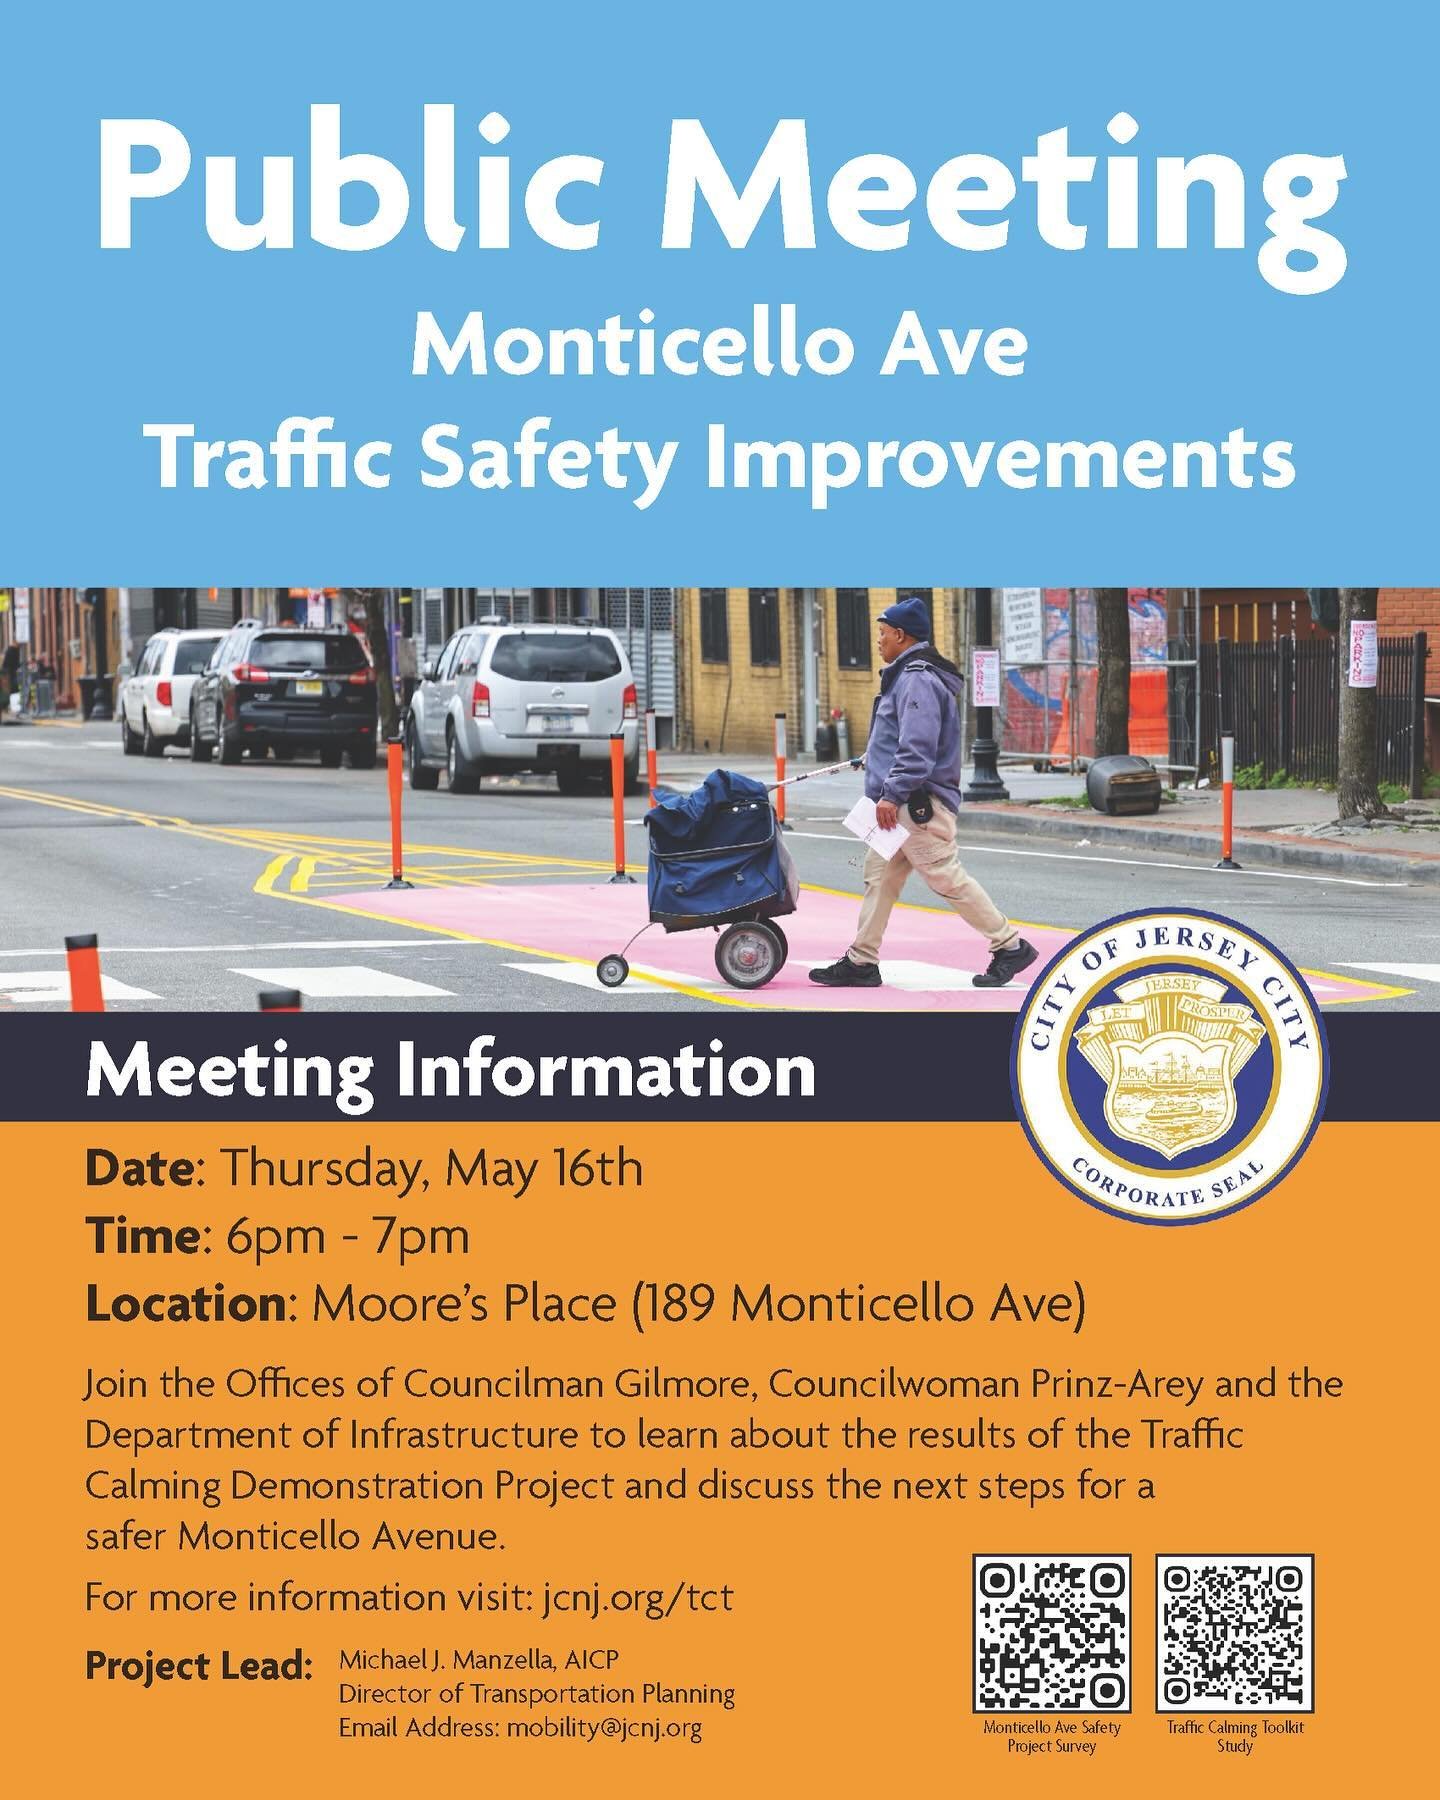 The community build event held on Saturday, April 6th was successful in bringing area residents together to help install the Traffic Calming Demonstration project. Members of the community had the opportunity to talk with the city&rsquo;s traffic tea